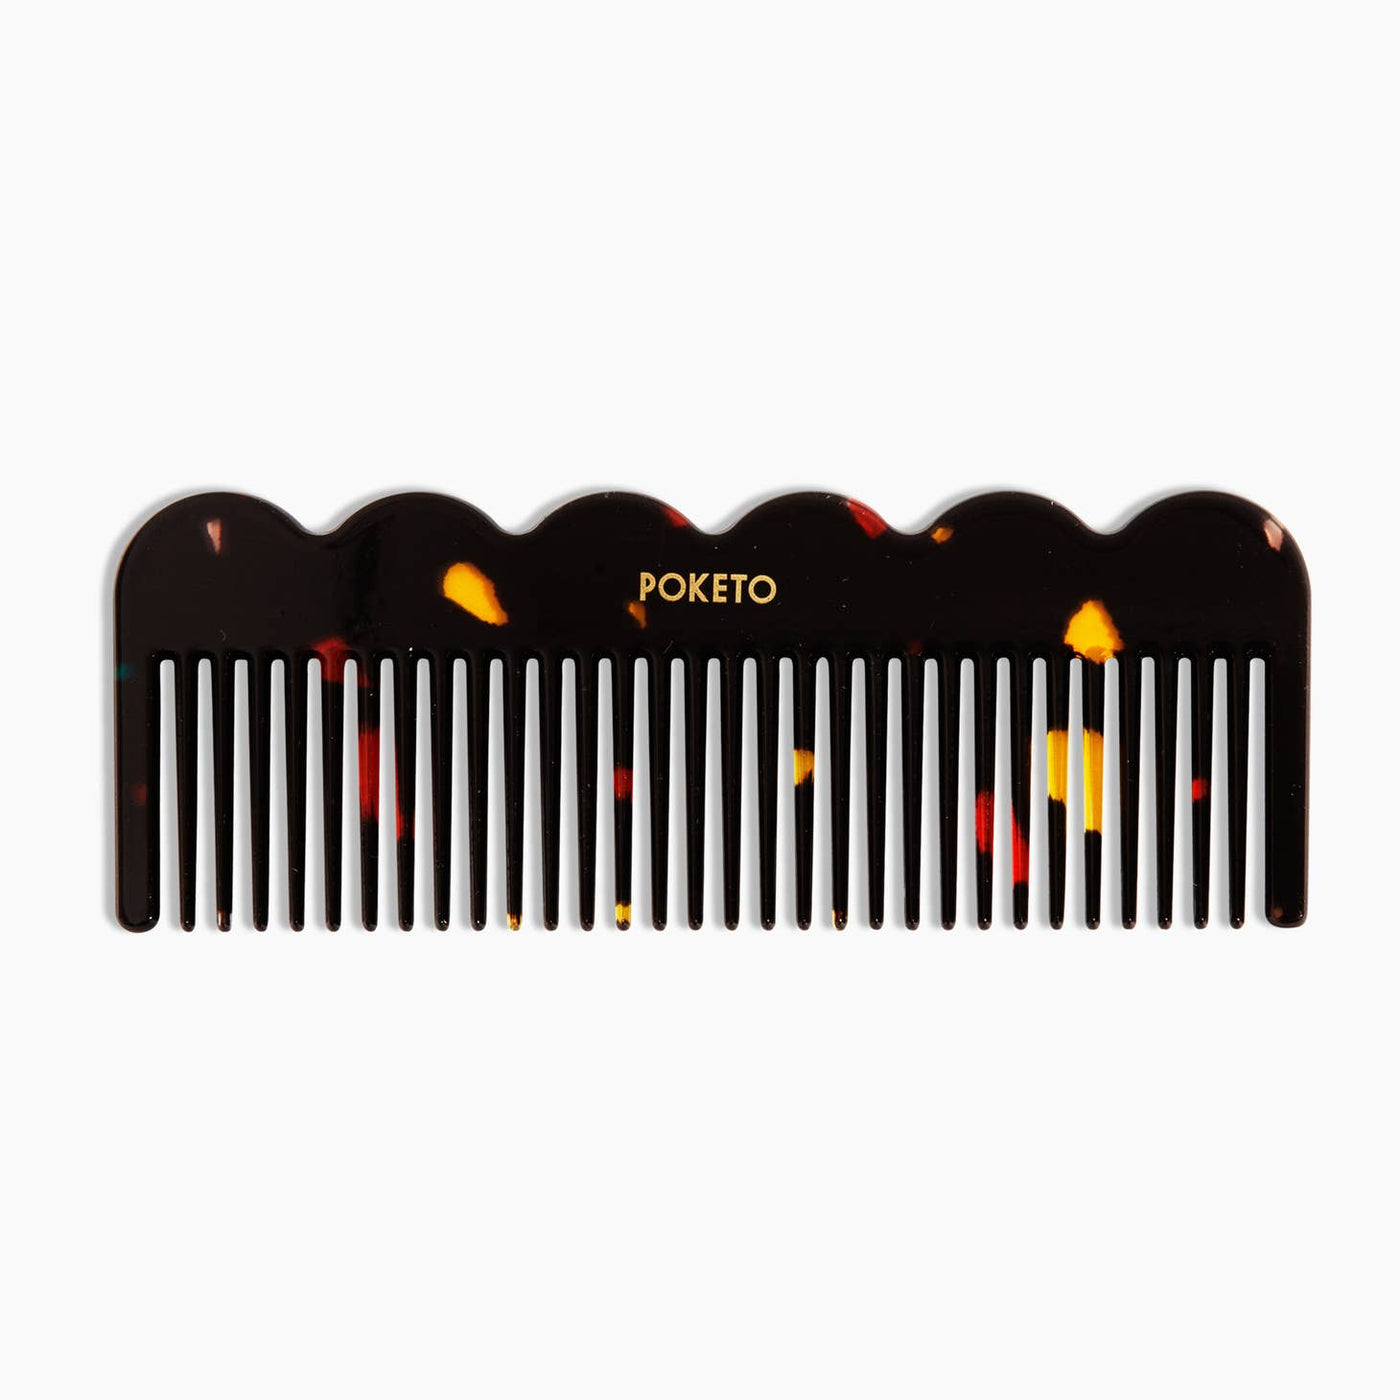 Tortoise shell comb with waves on the handle and Poketo printed in caps in gold in the center of the handle